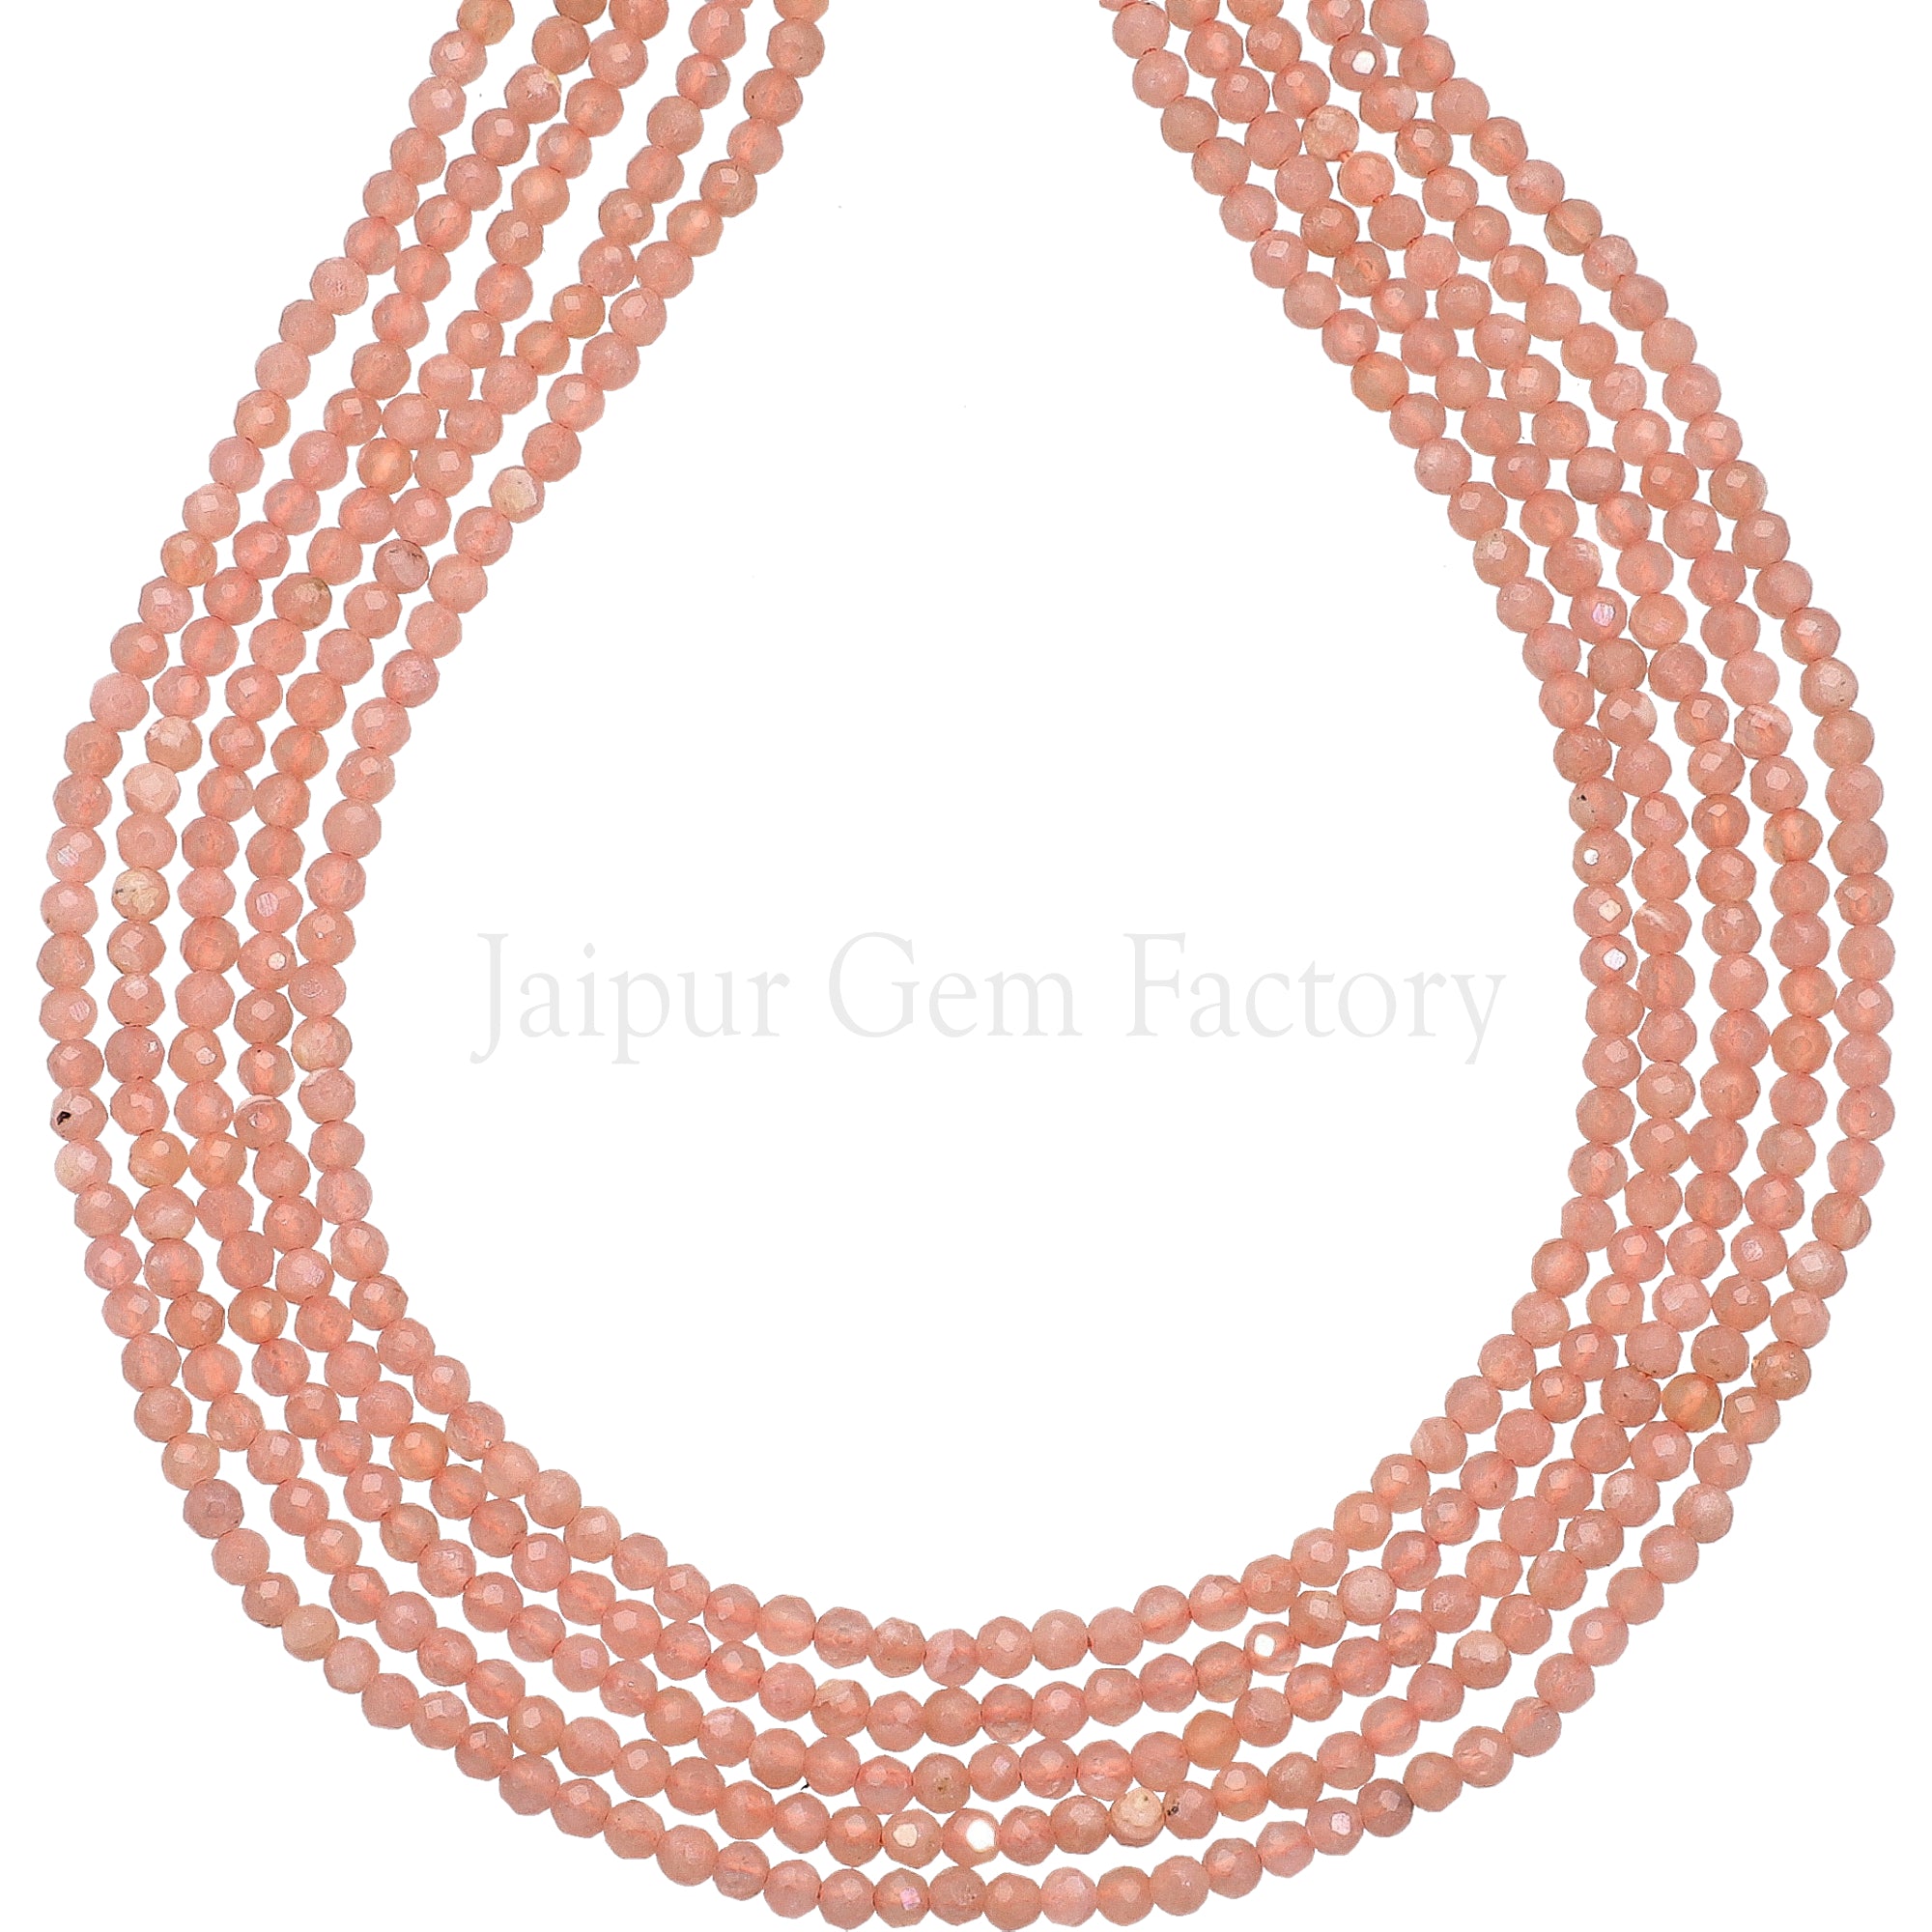 2-2.5 MM Peach Moonstone Faceted Round Beads